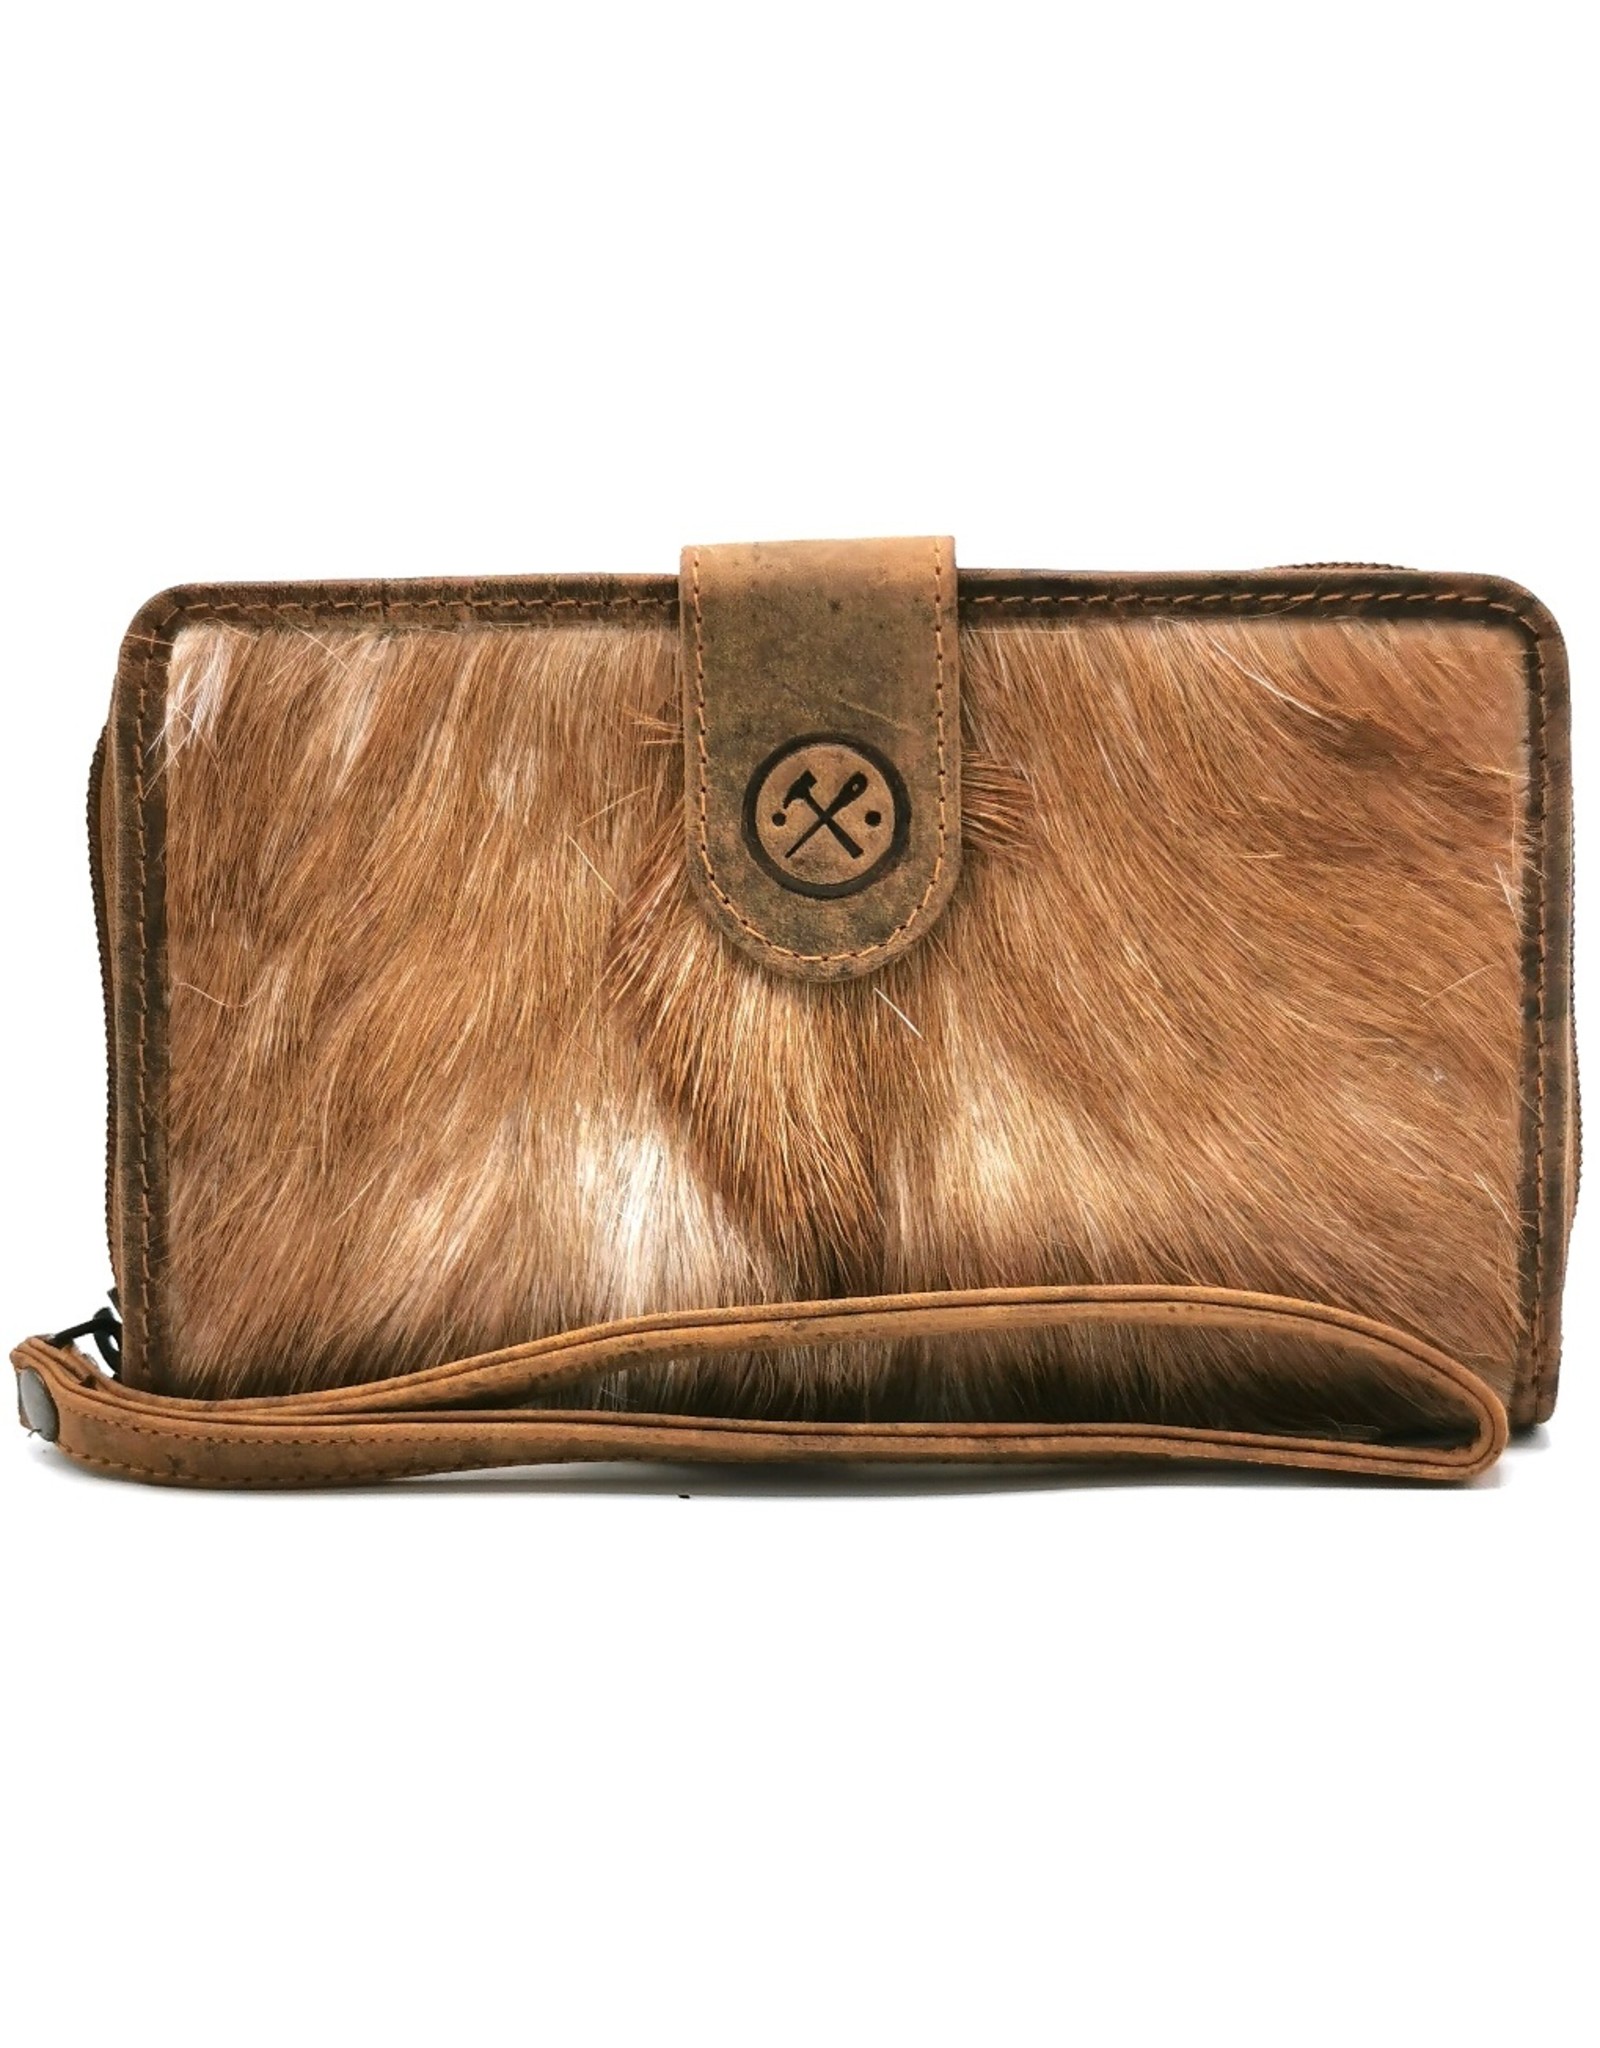 Hide & Stitches Leather Wallets - Leather Purse with Cowhide brown-white